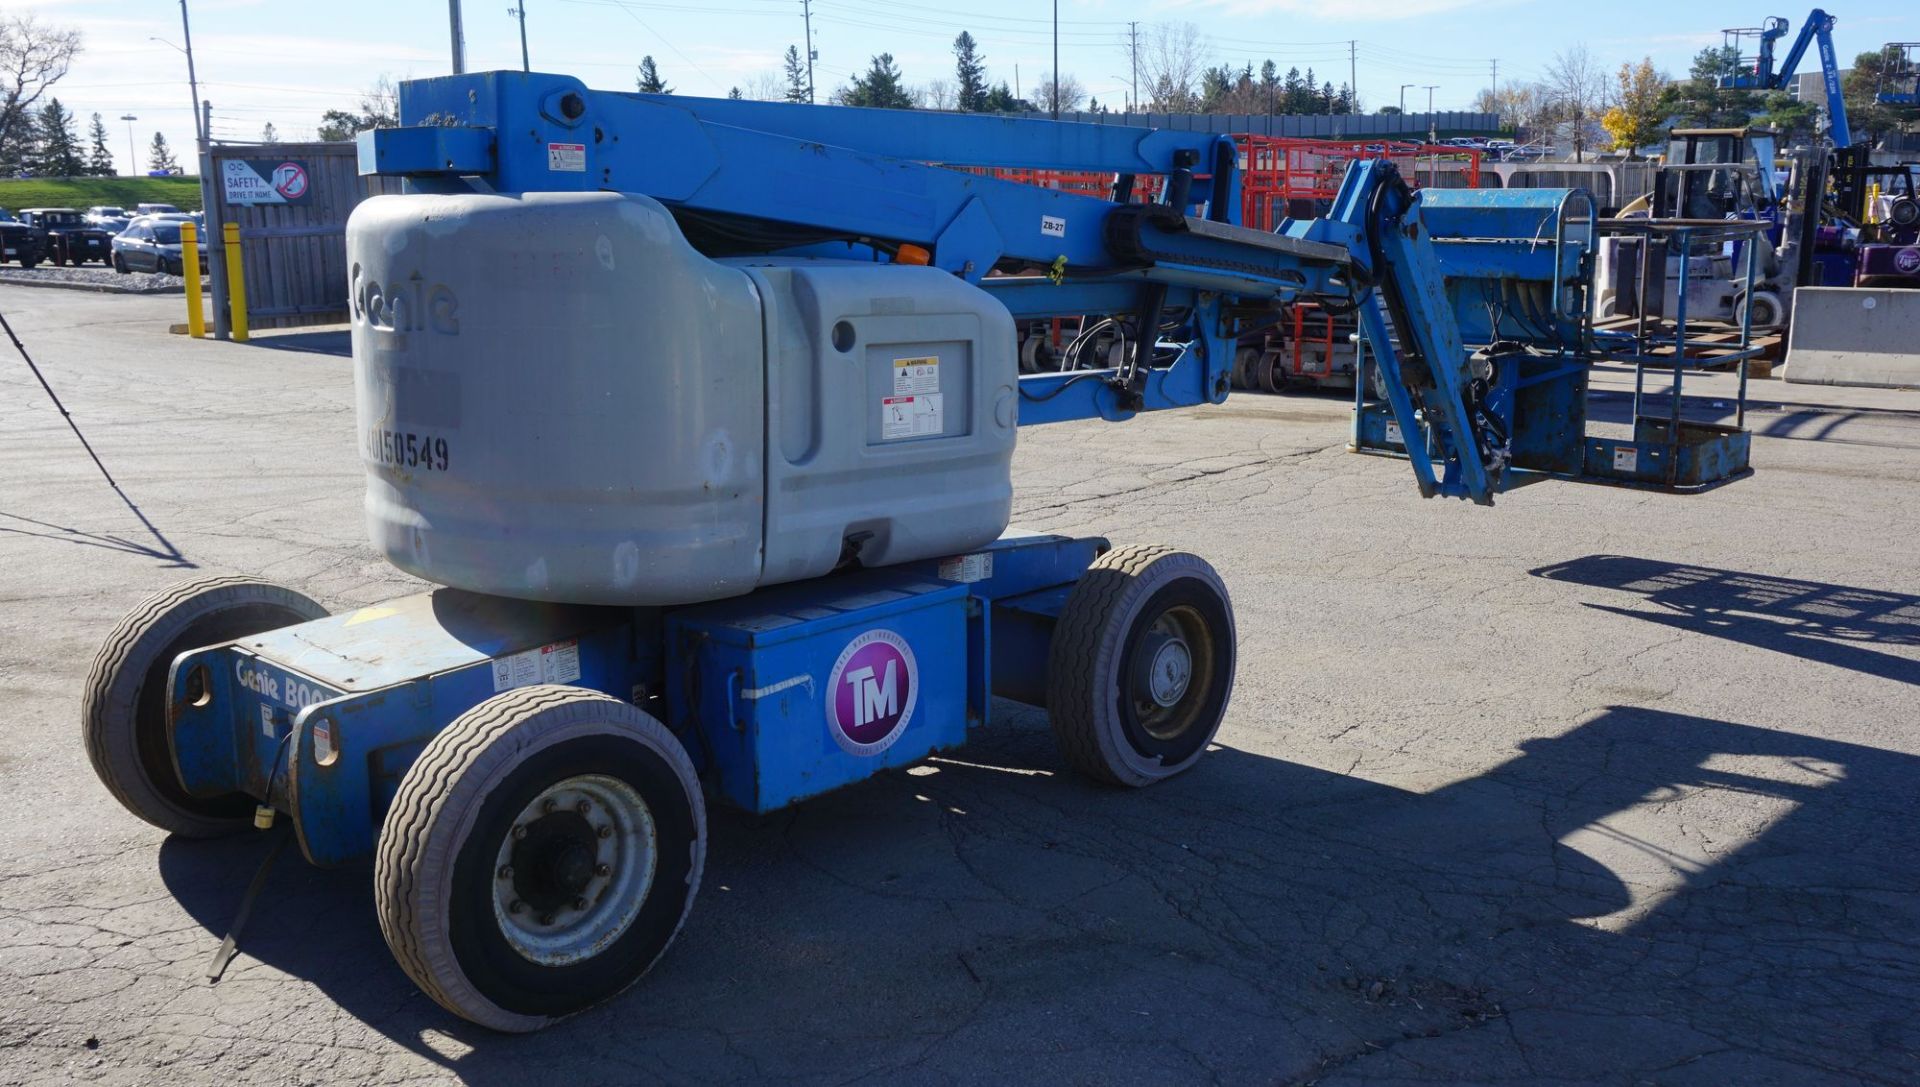 2008 GENIE MODEL Z45/25J BATTERY POWERED ARTICULATING BOOM LIFT, 45' MAX PLATFORM HEIGHT - 51' - Image 5 of 10